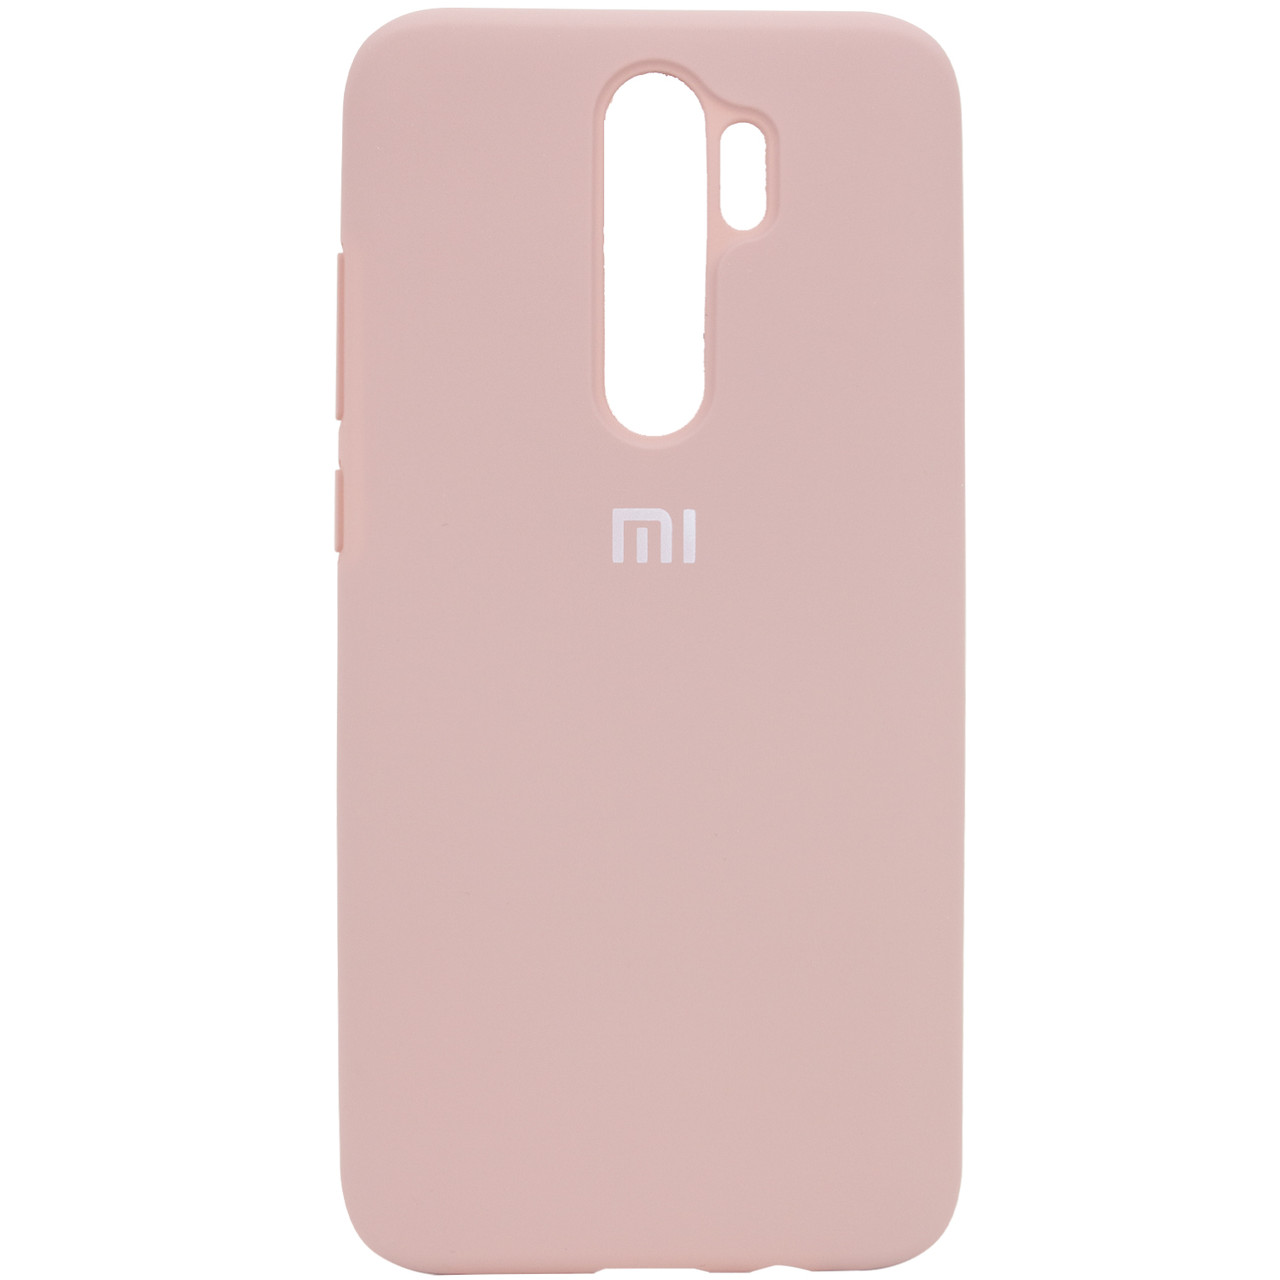 

Чехол Silicone Cover Full Protective (AA) для Xiaomi Redmi Note 8 Pro, Розовый / pink sand